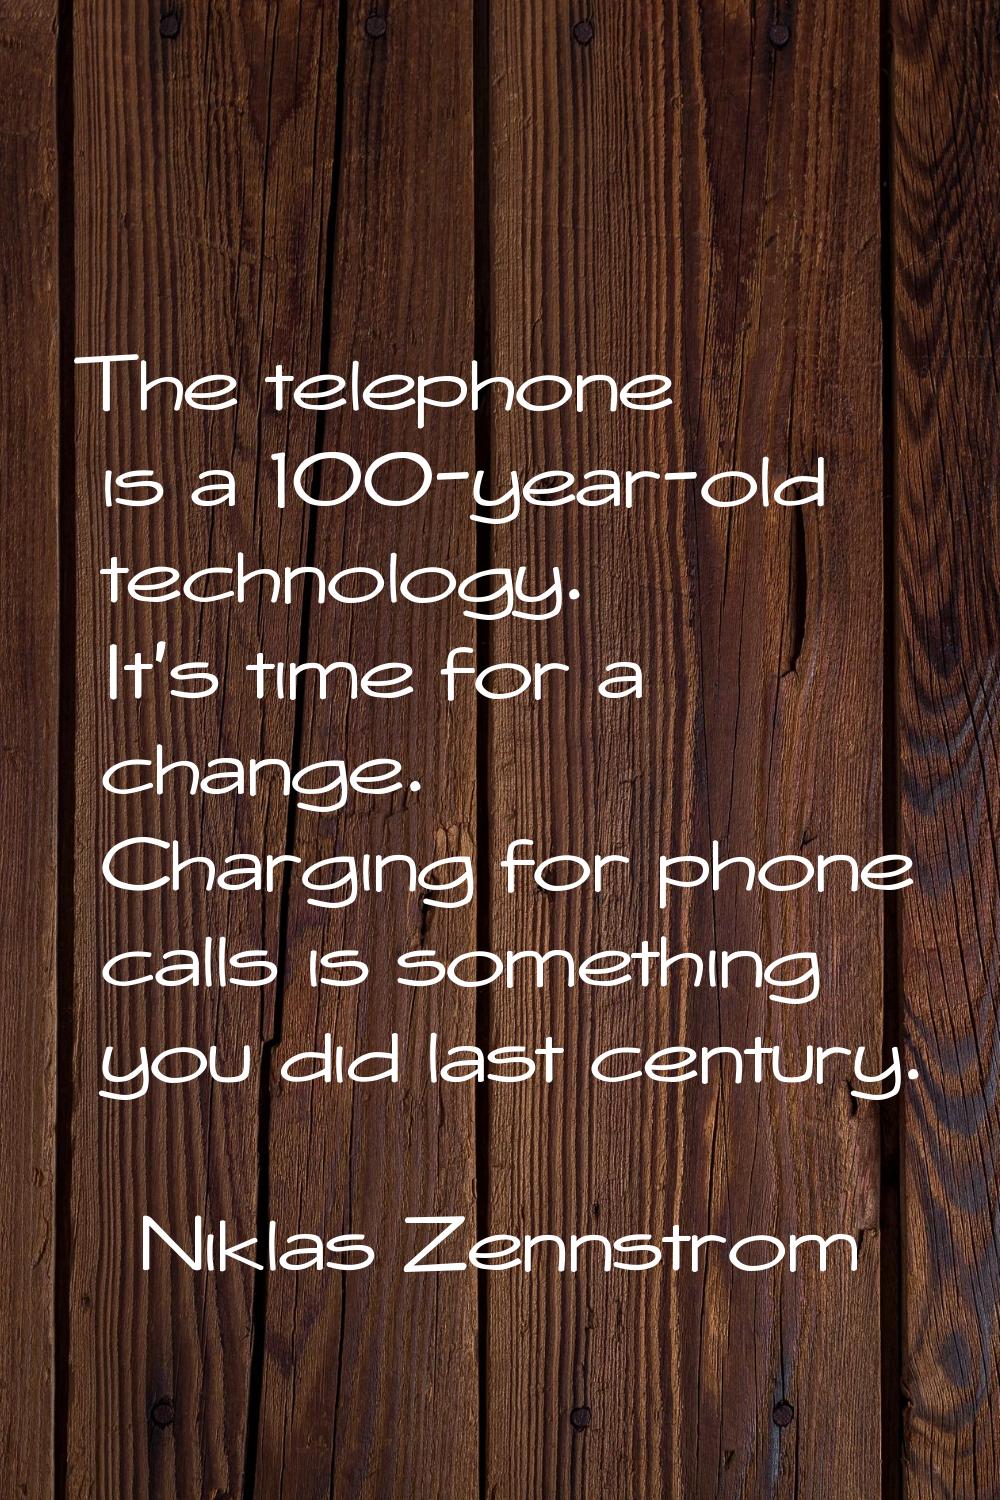 The telephone is a 100-year-old technology. It's time for a change. Charging for phone calls is som